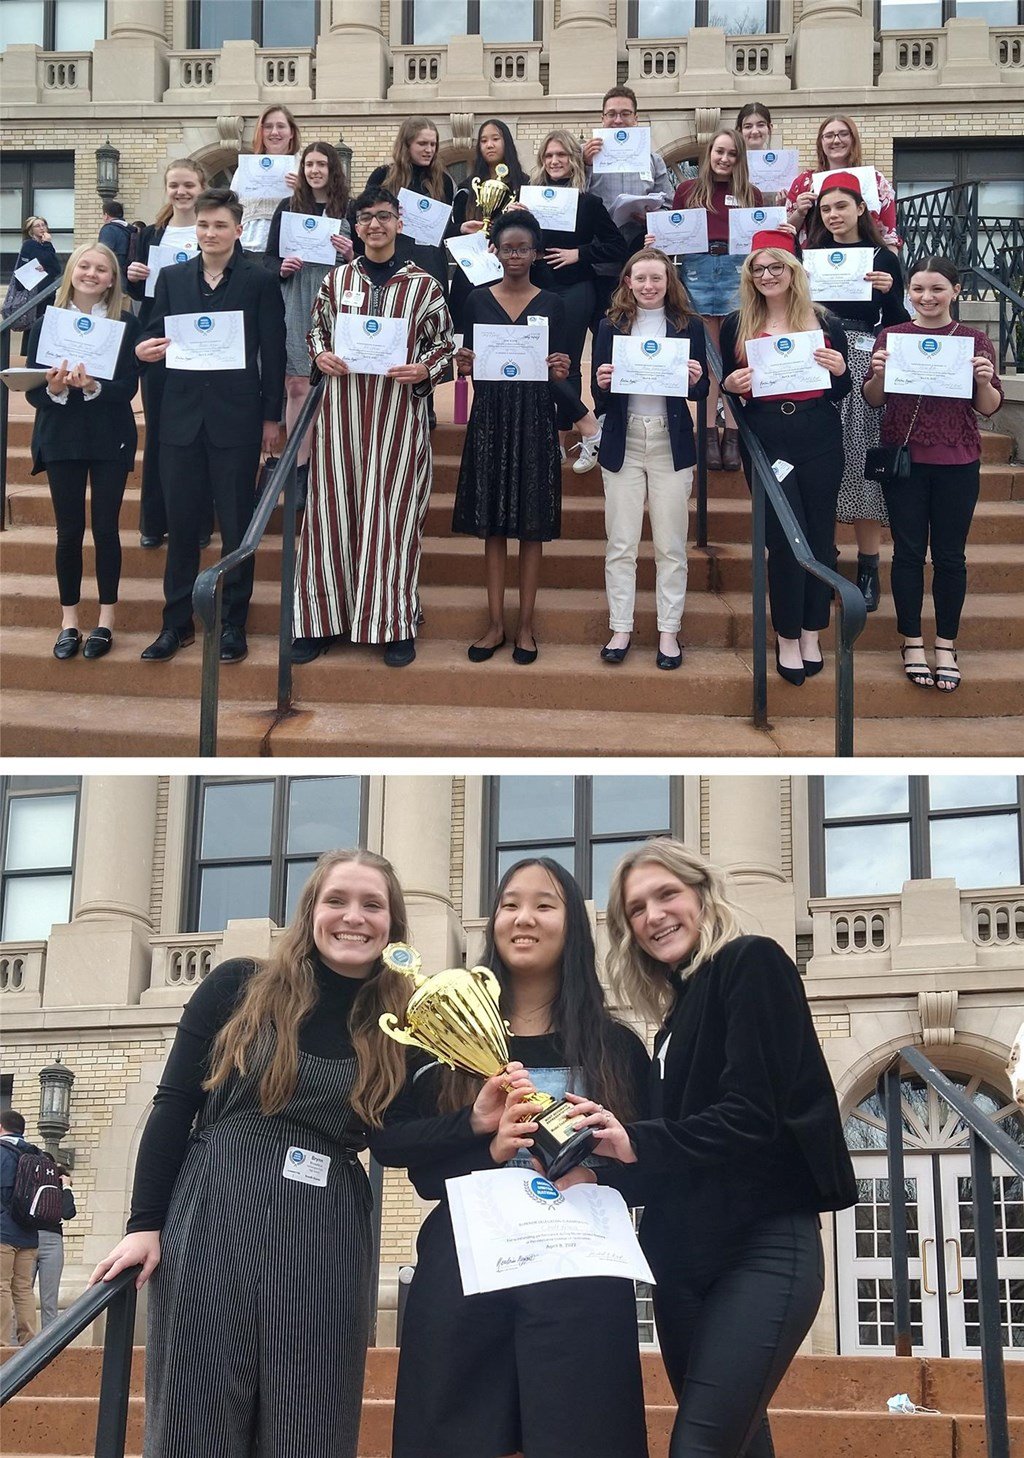 2022 Model UN students from WAHS stand holding certificates and trophies.